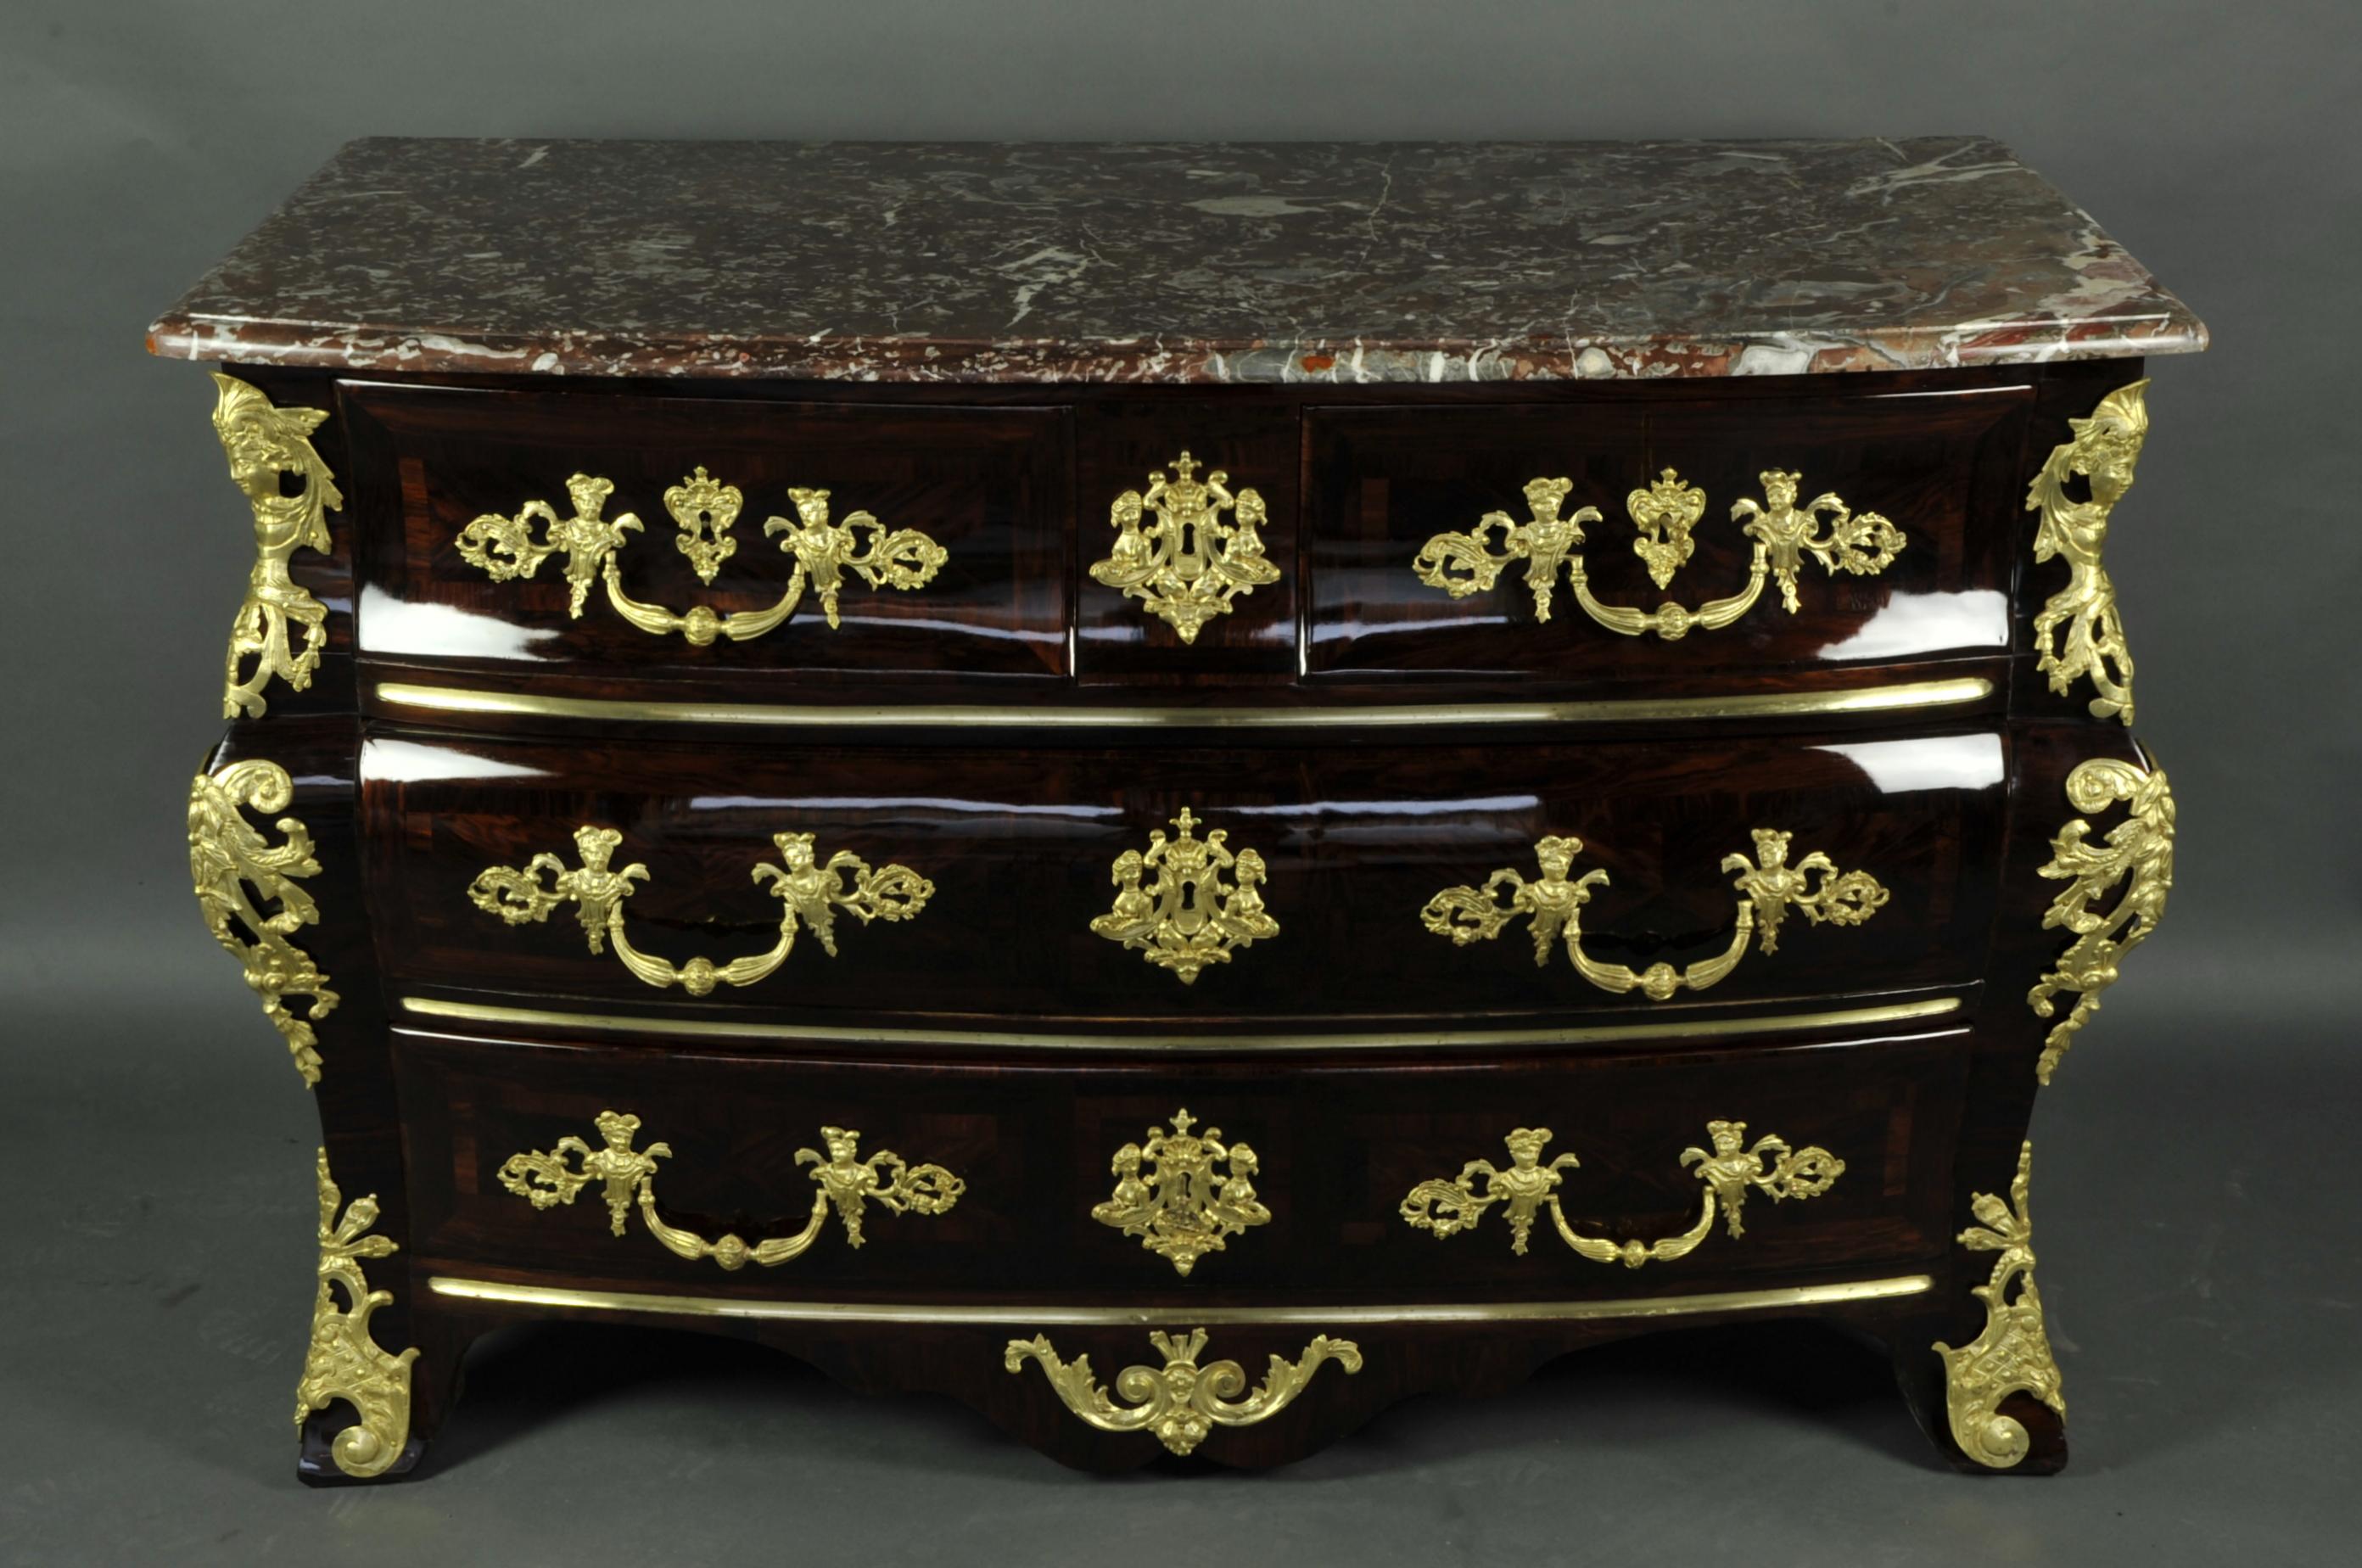 Ormolu Important Regency Period Tombeau Commode Stamped Jean-Mathieu Chevallier  For Sale